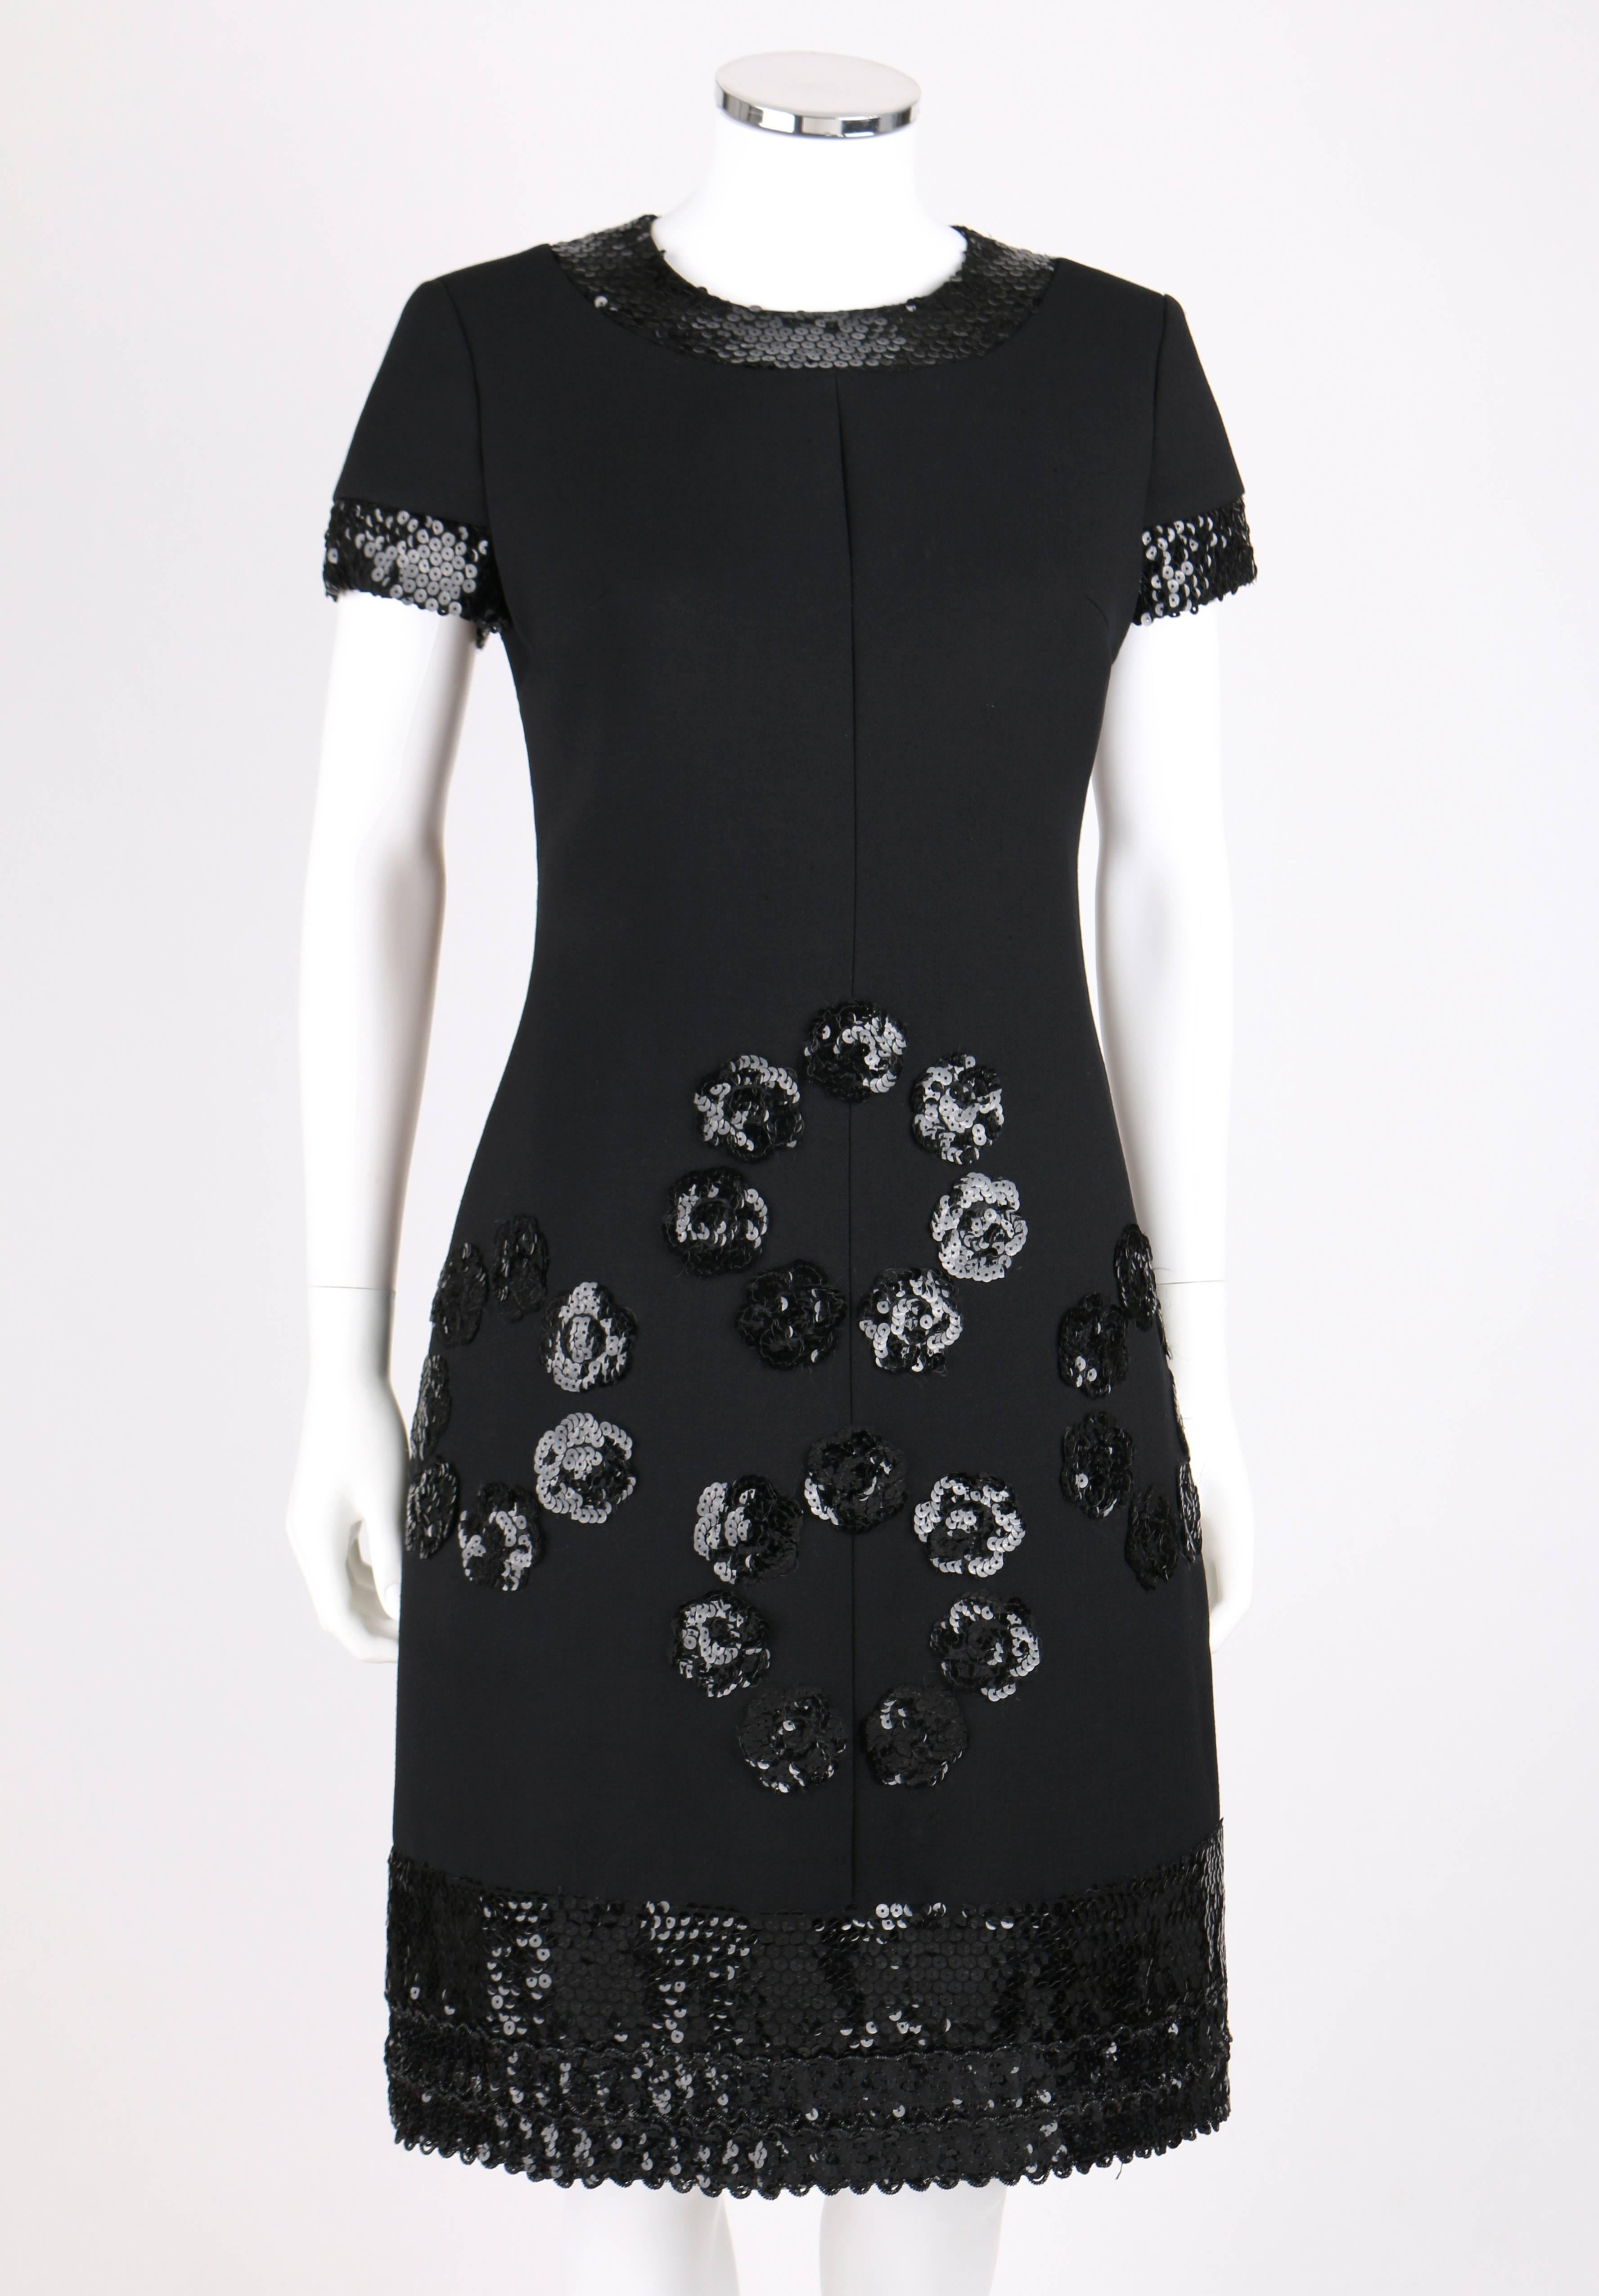 Vintage Jean Patou c.1960's black wool cocktail dress designed by Karl Lagerfeld. Short sleeves with scoop neckline. Black sequin trim along cuffs and collar with beaded scallop shaped hemline. Four clusters of sequin camellia flowers along front.